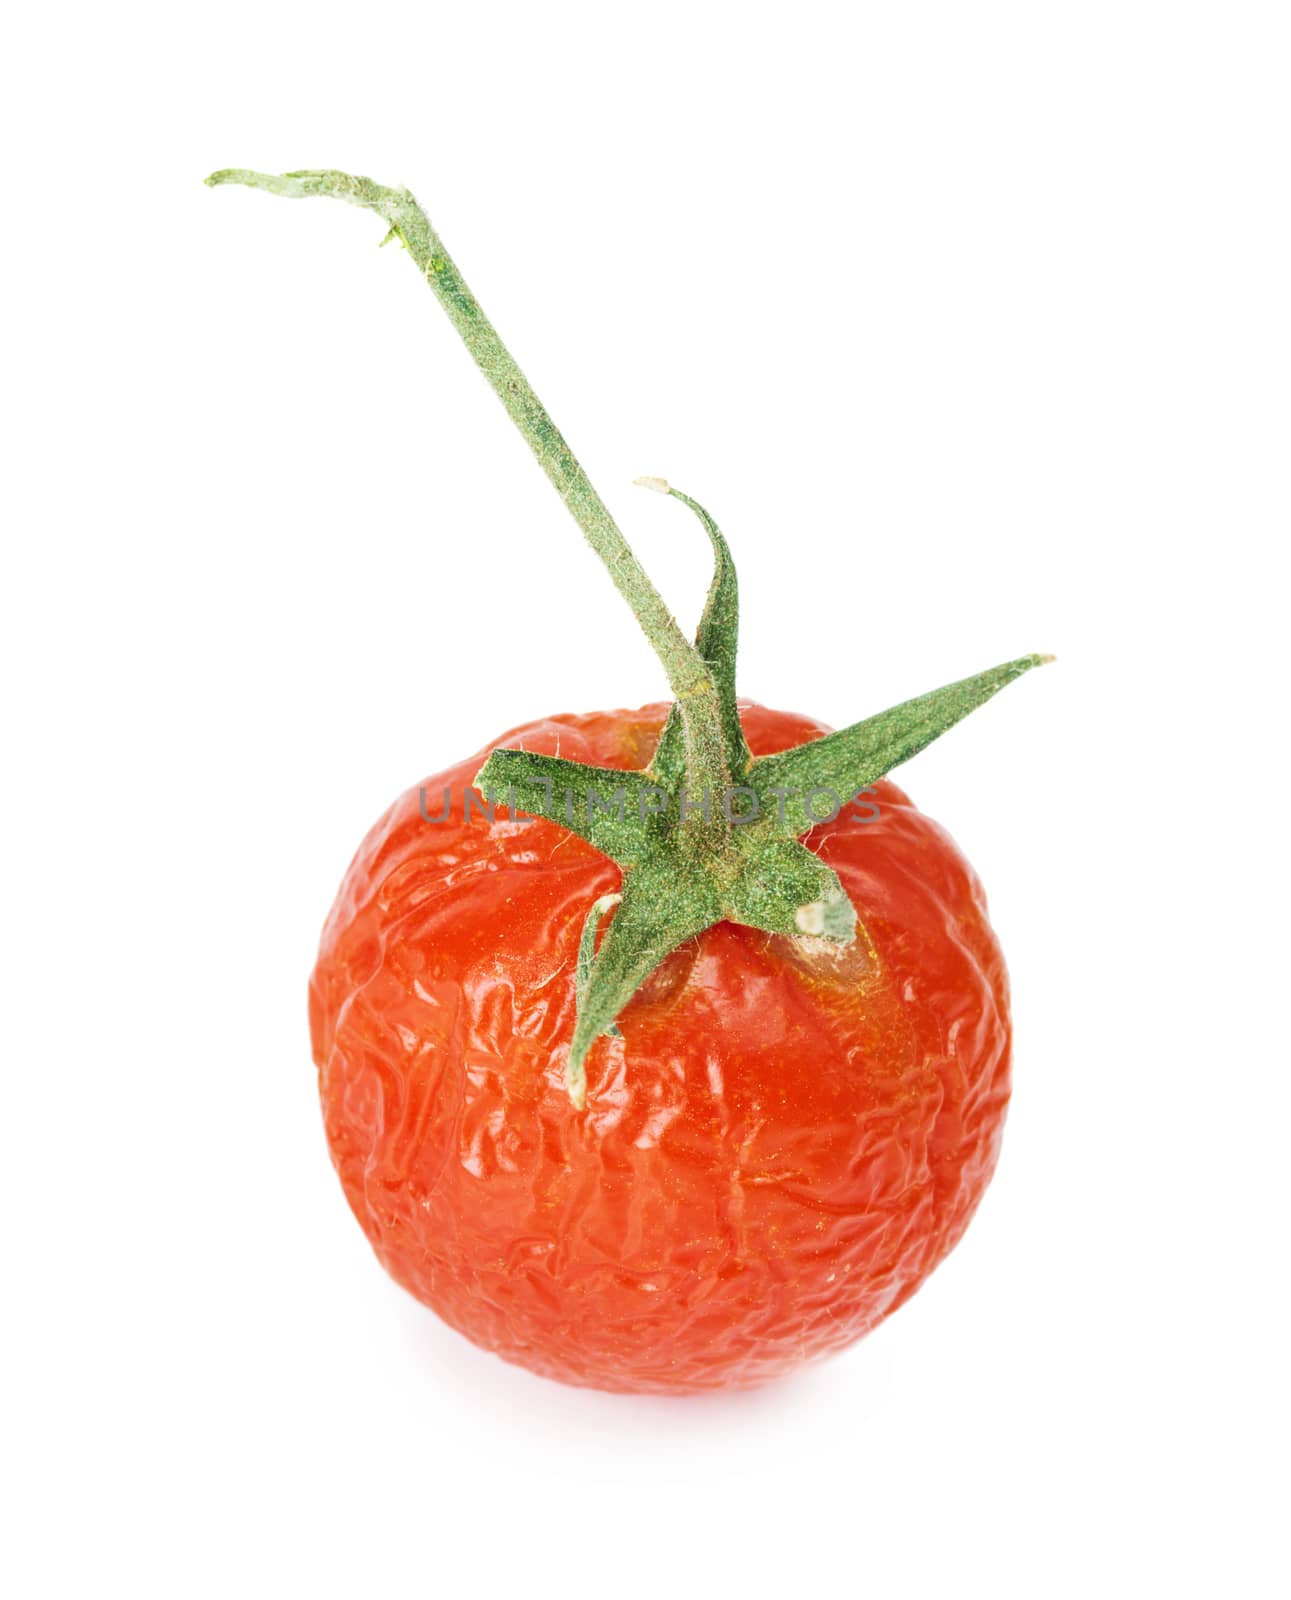 Withered red tomato with shrunken skin on white background